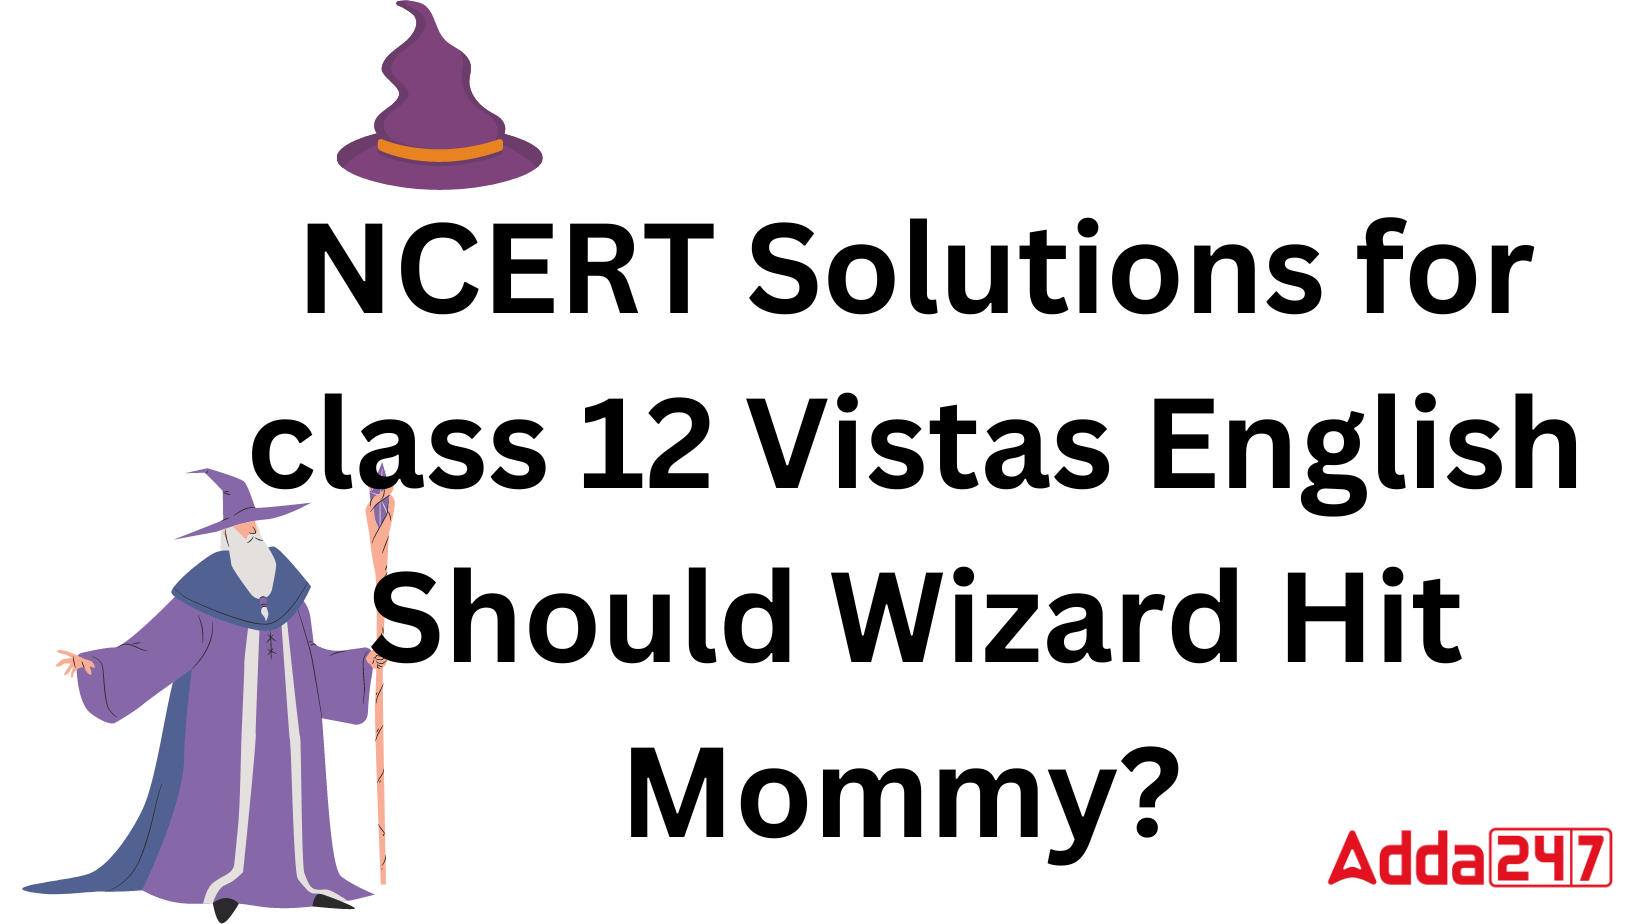 NCERT Solutions for Class 12 Vistas English Chapter 5 Should Wizard Hit Mommy?_20.1